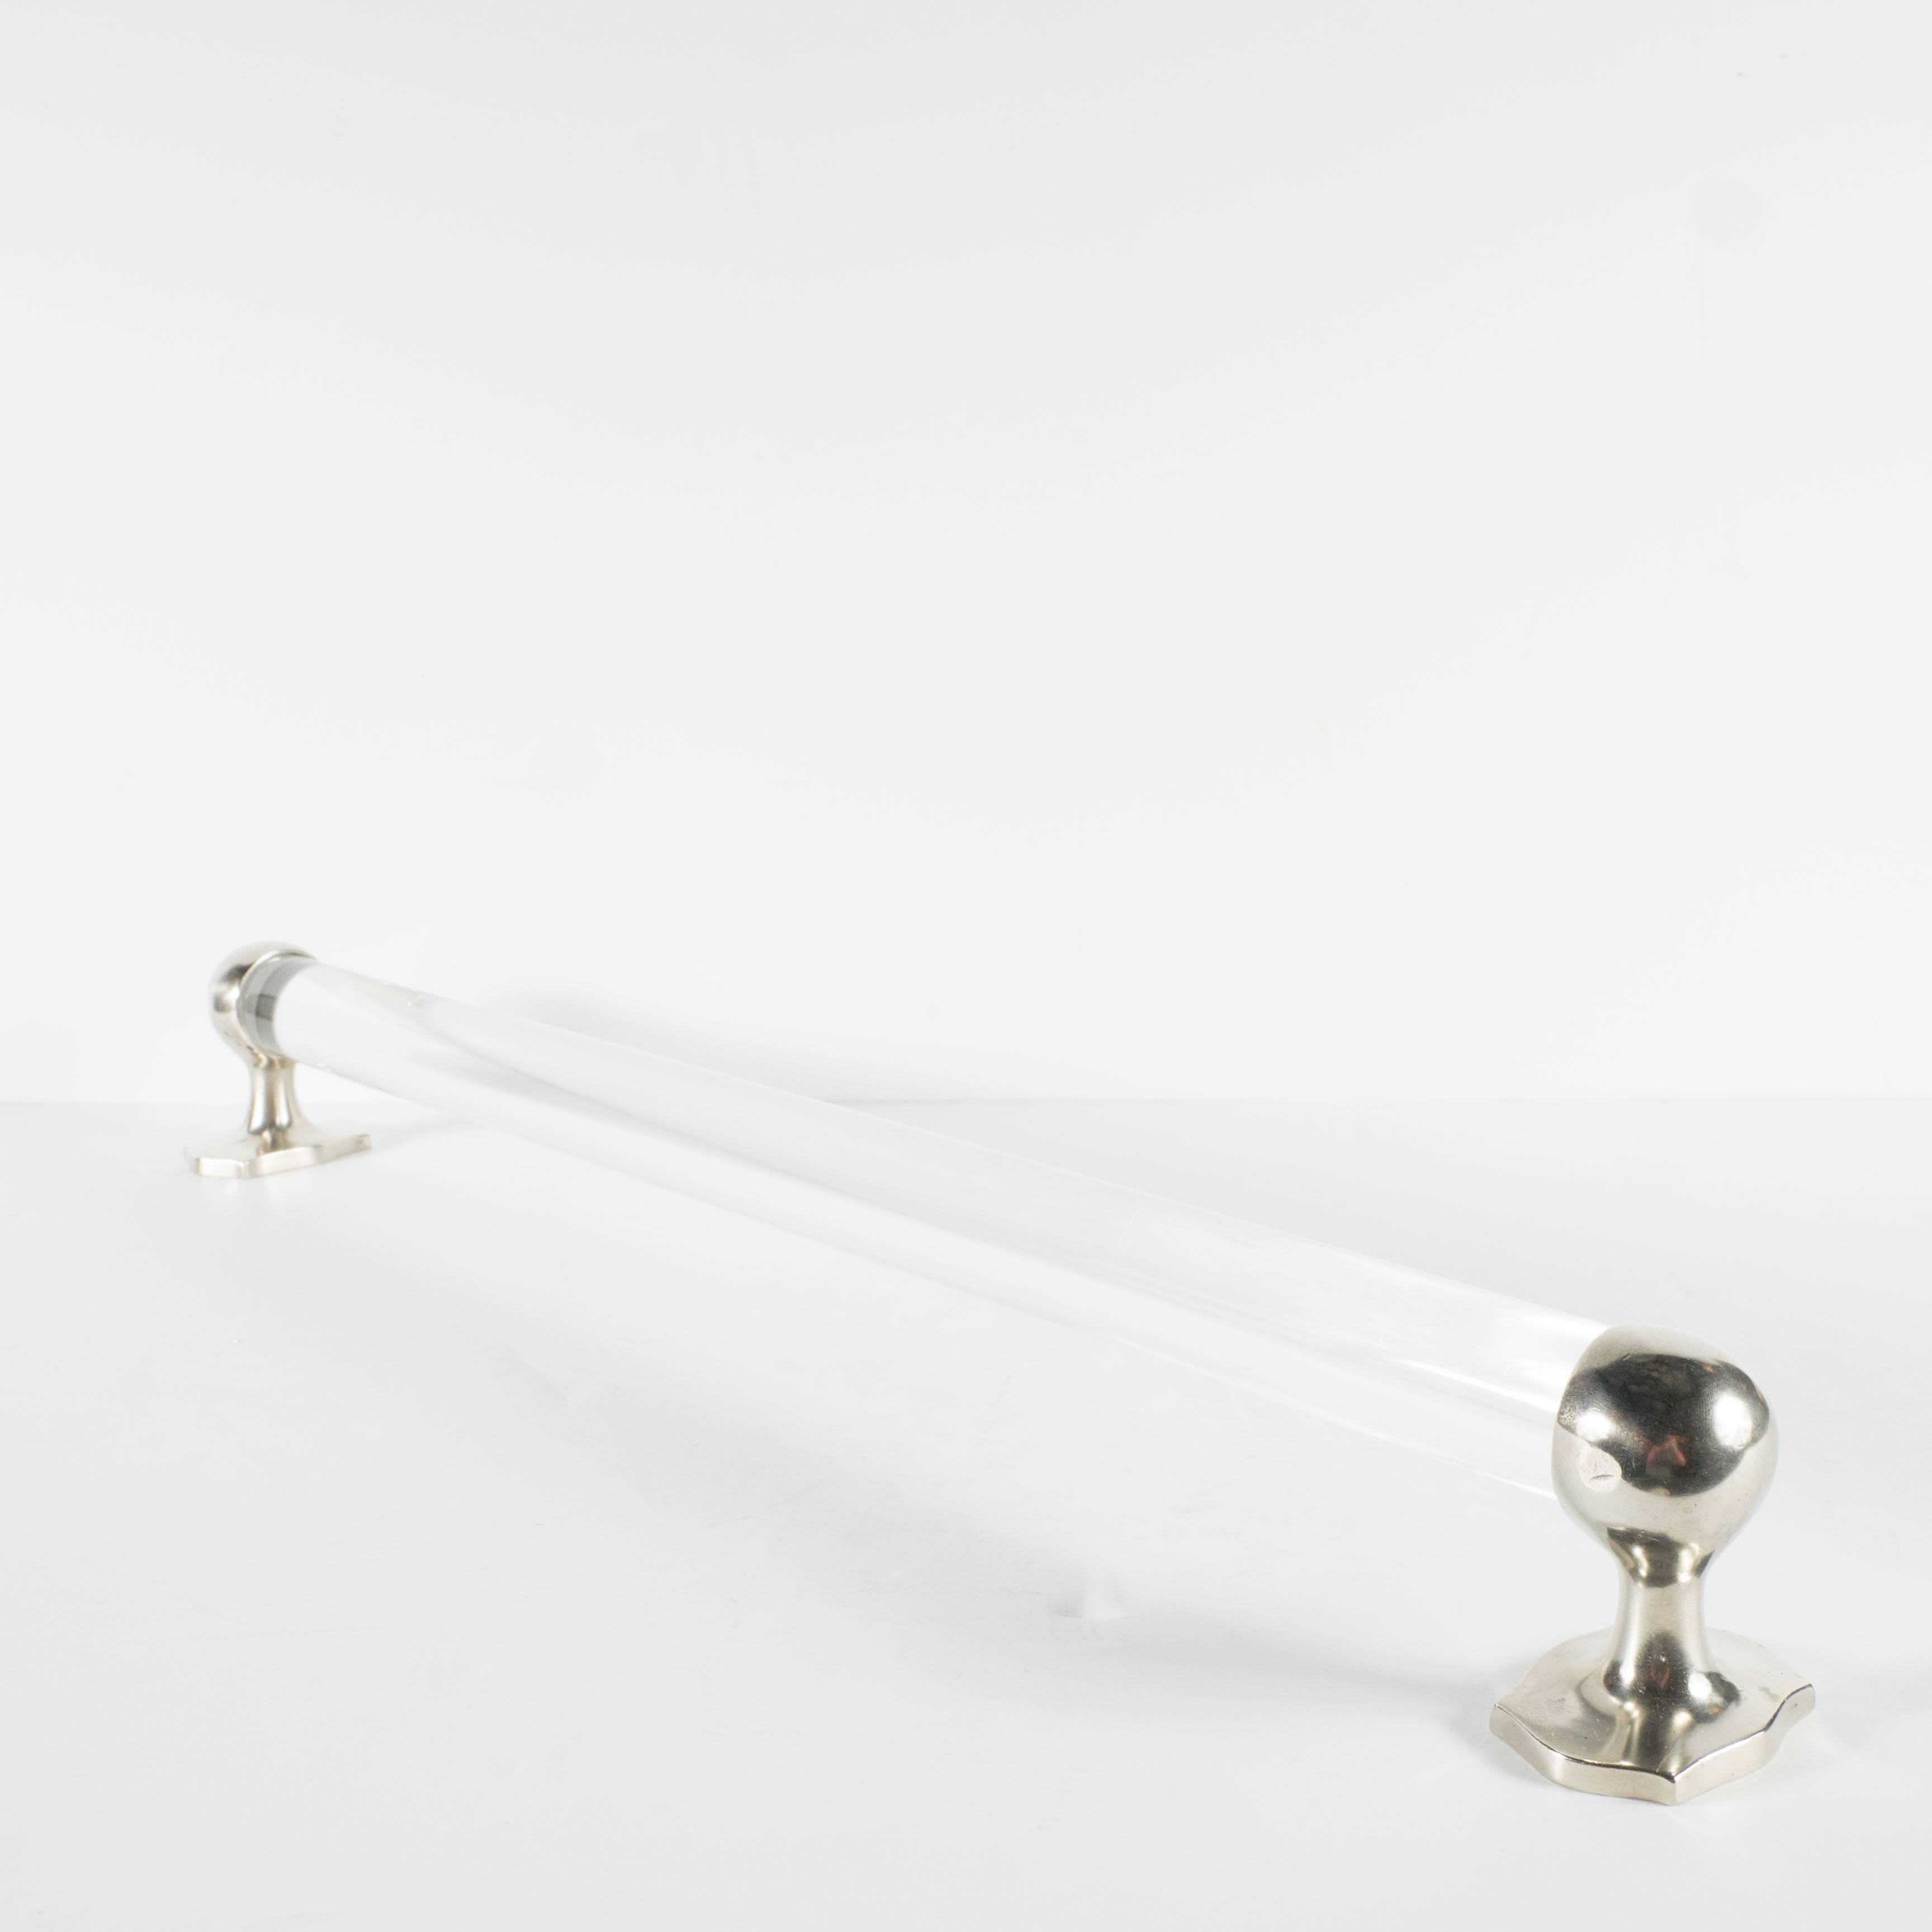 A stylish Mid-Century Modernist Lucite and brushed nickel towel rod attractively finished in transparent circular shaped Lucite with bold round nickel end fixtures somewhat reminiscent of the clean Art Deco style. A simple yet stylish design worthy